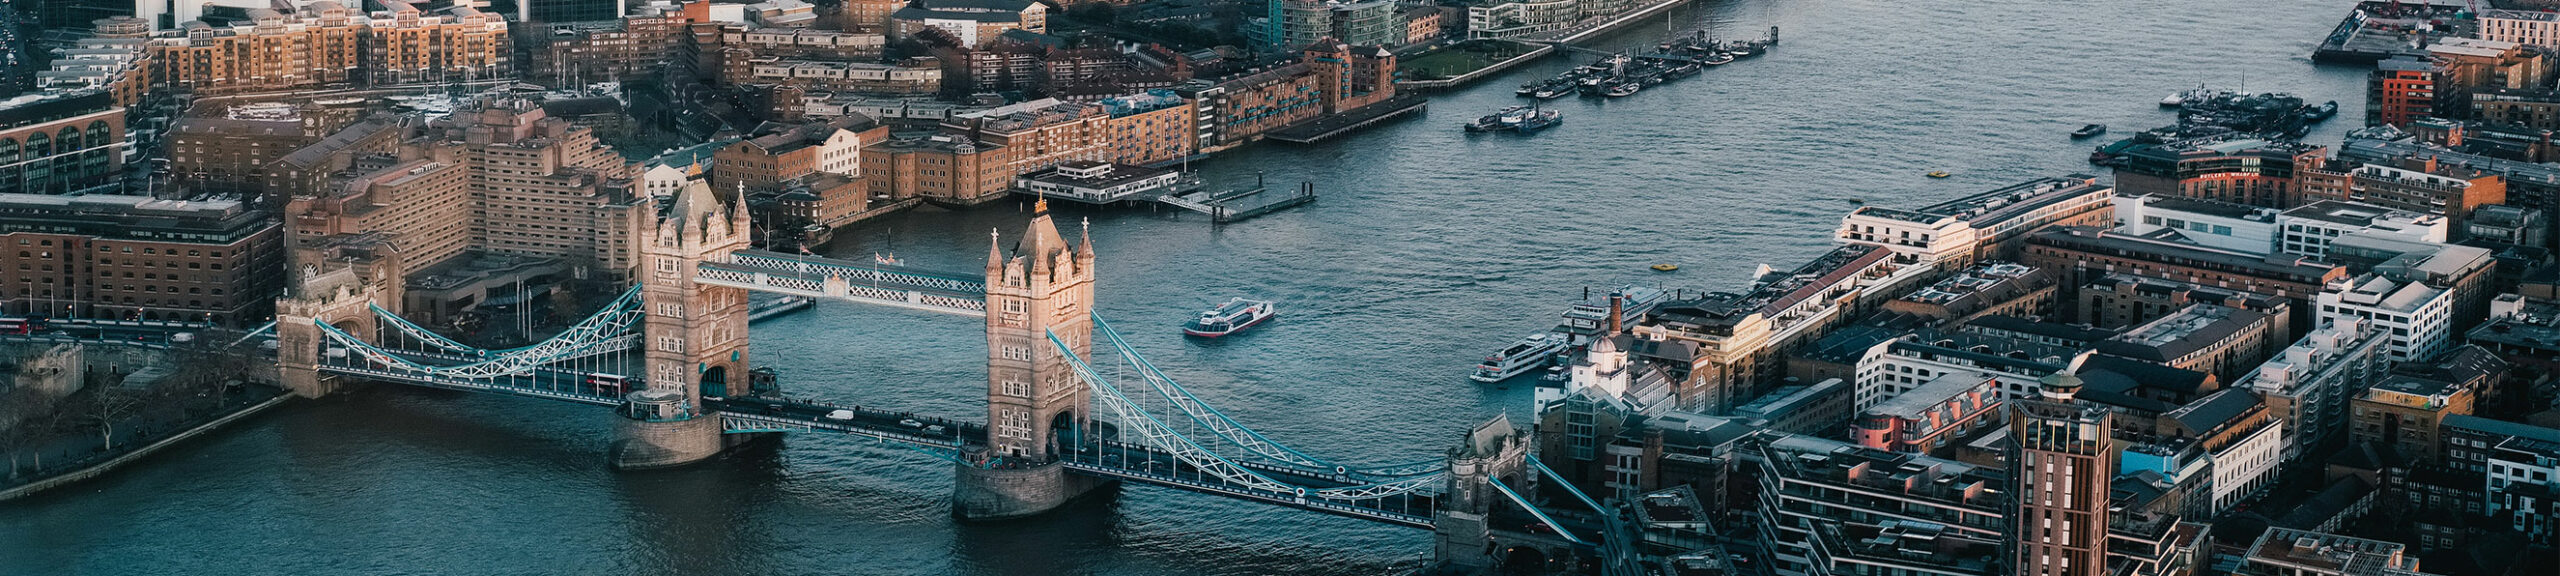 london tower bridge from the sky